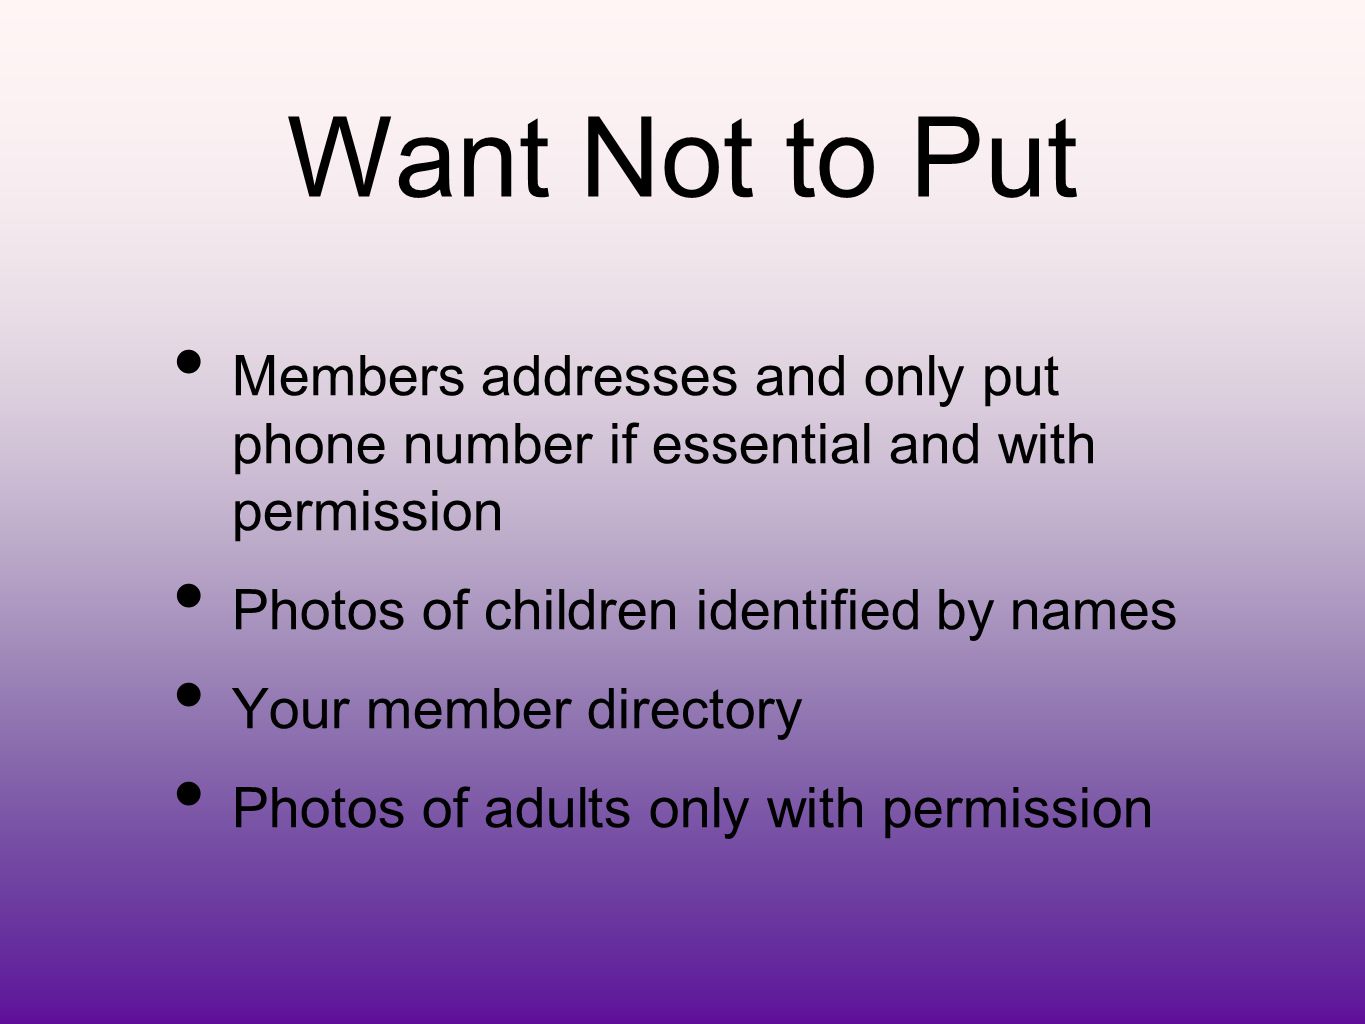 Want Not to Put Members addresses and only put phone number if essential and with permission Photos of children identified by names Your member directory Photos of adults only with permission